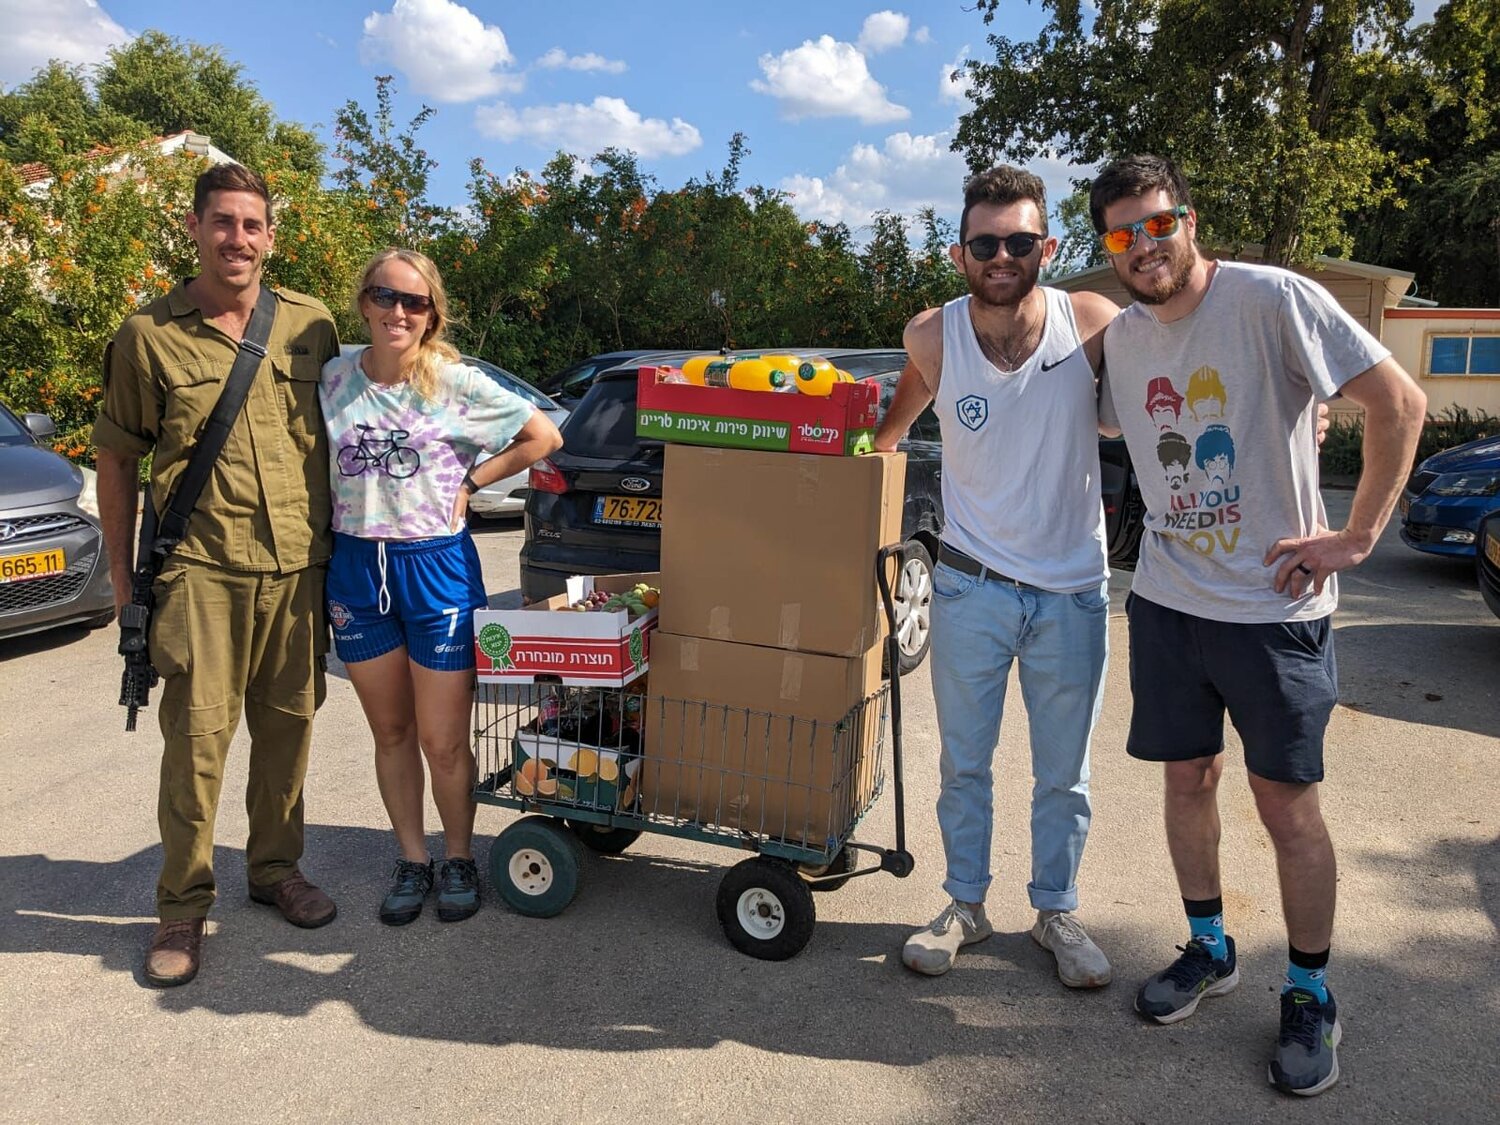 Sarah Meisenberg has organized a three-person team to raise money and deliver meals to Israeli soldiers.